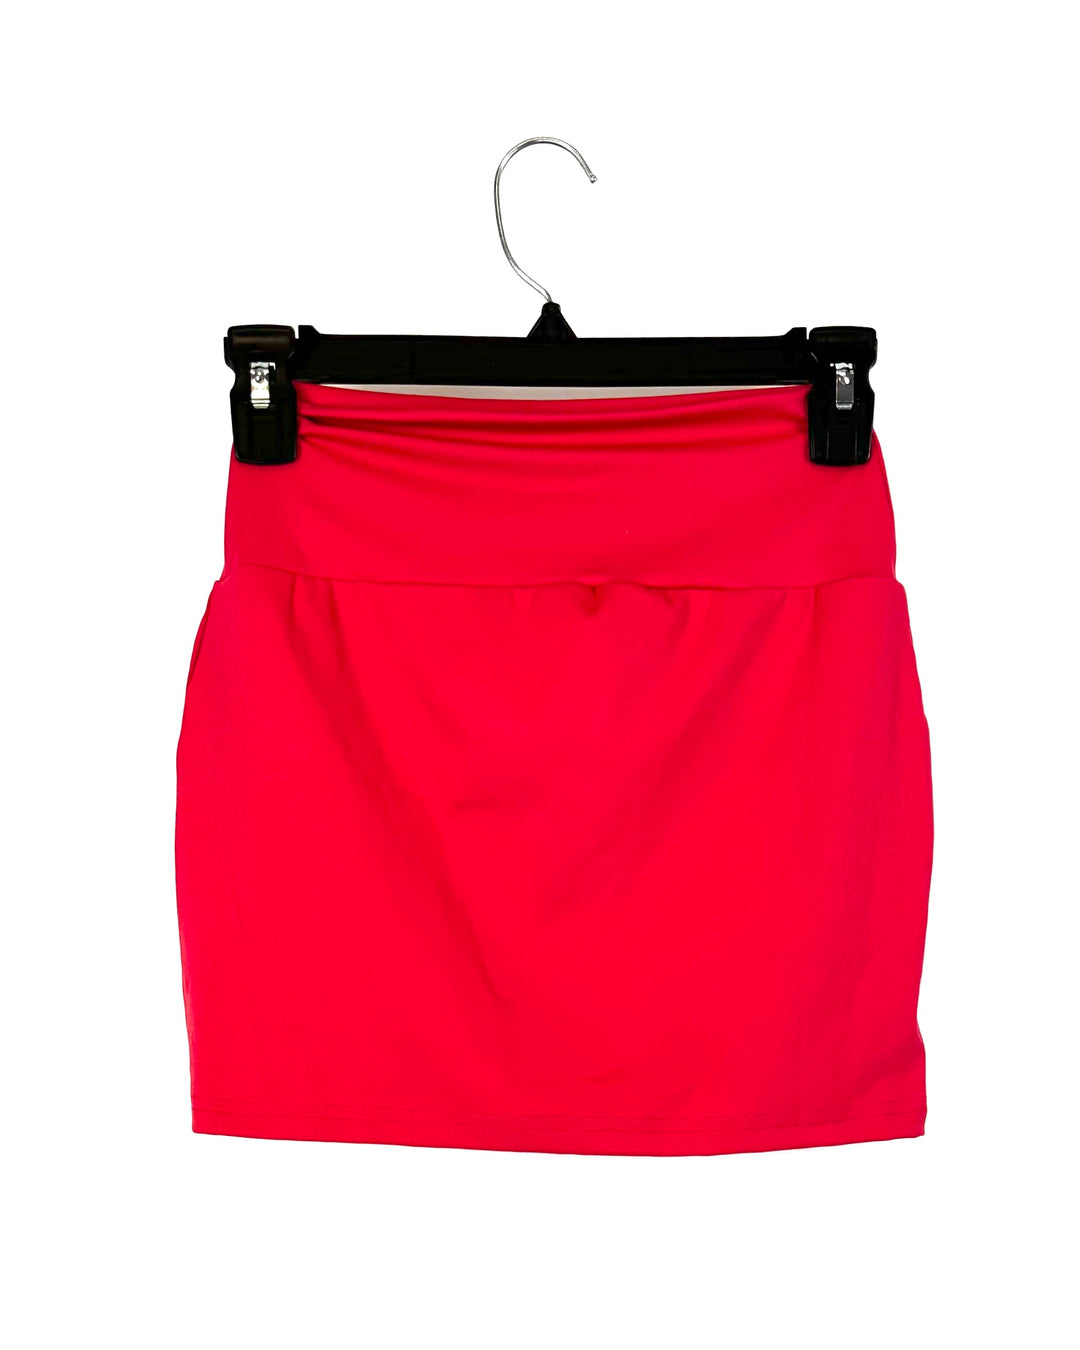 Pink Mini Skirt - Extra Small, Small, Medium and Large